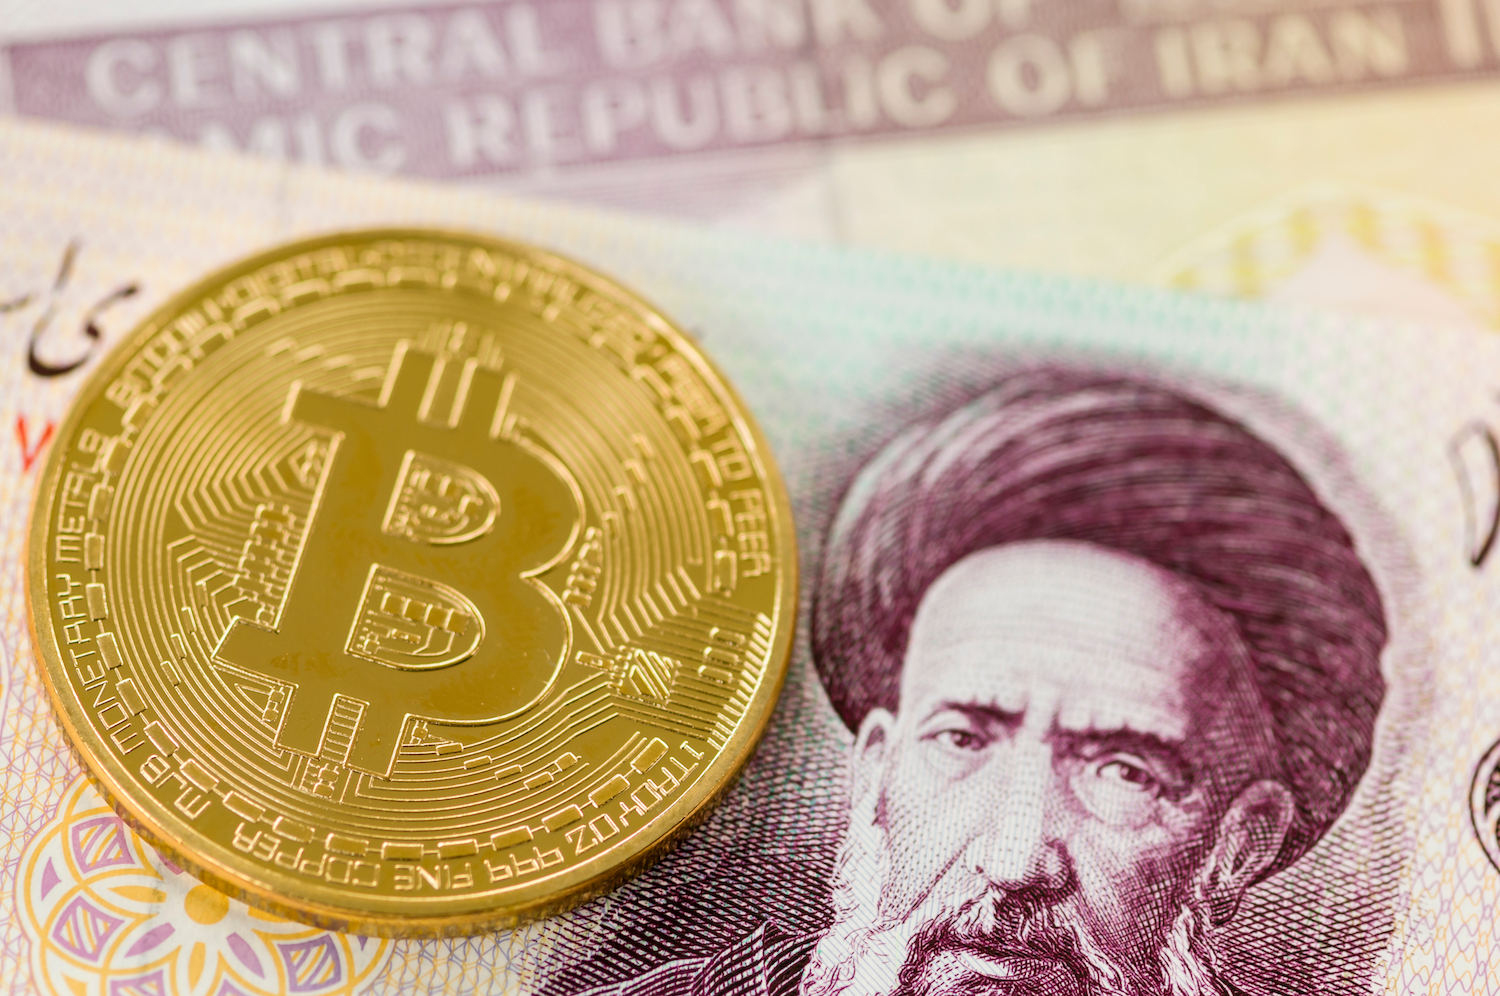 Crypto Miners’ Electricity Shouldn’t Be Subsidized: Iranian Energy Minister